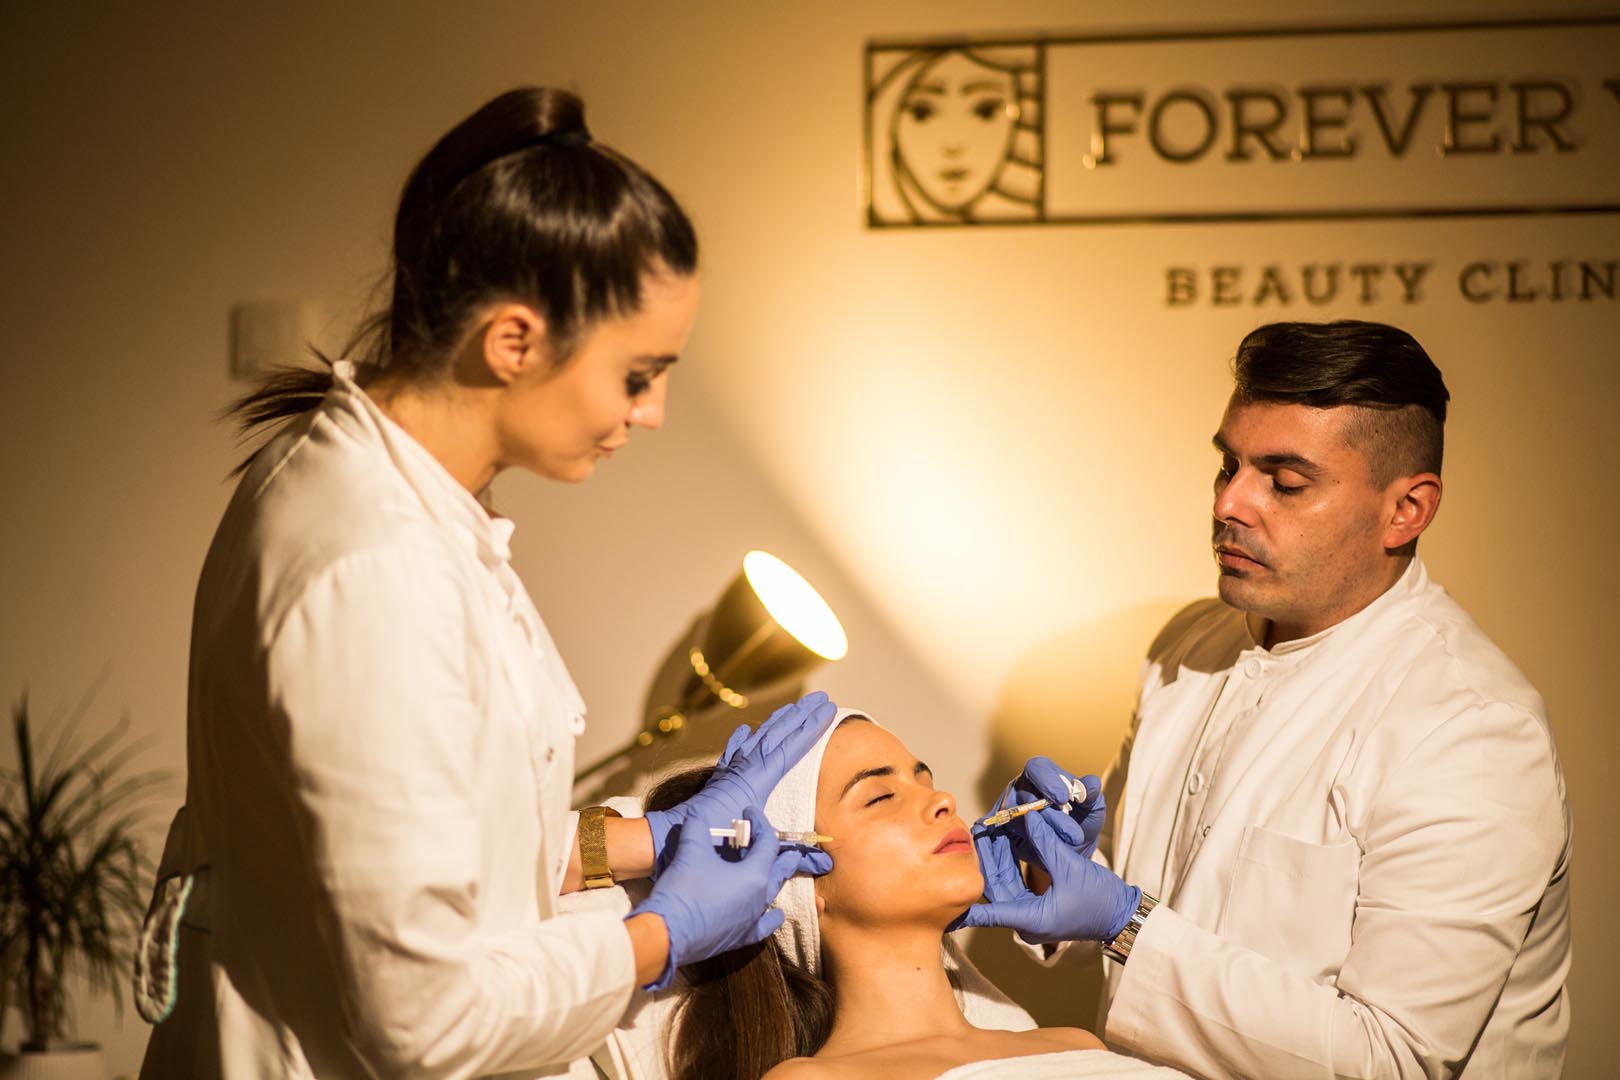 Forever Young – Beauty clinic